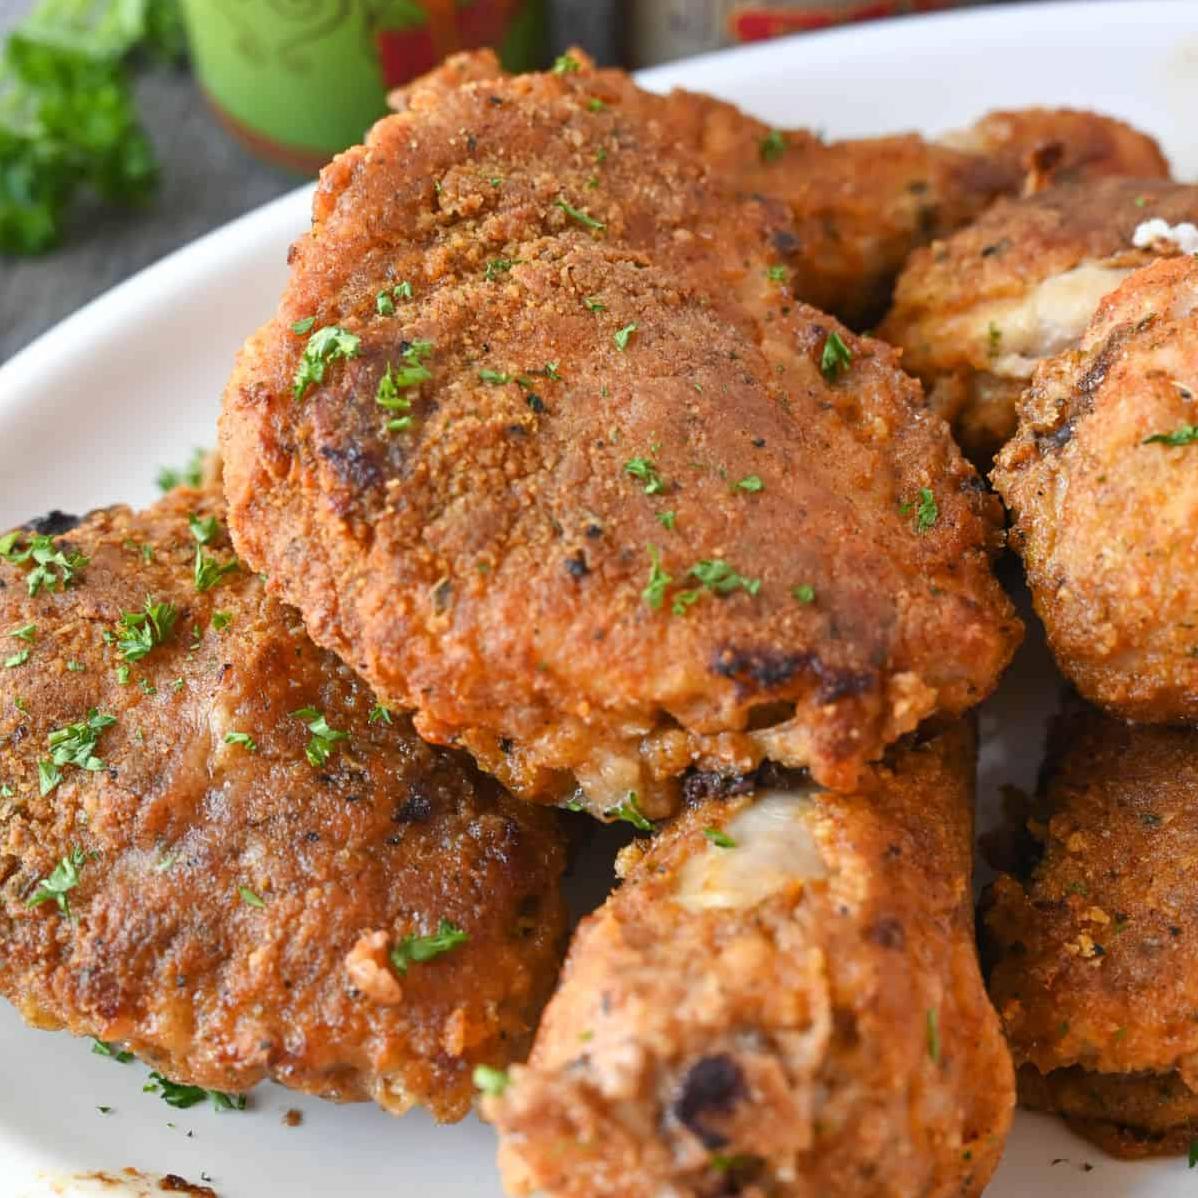  Fun fact: Oven-fried chicken is actually healthier than deep-fried chicken